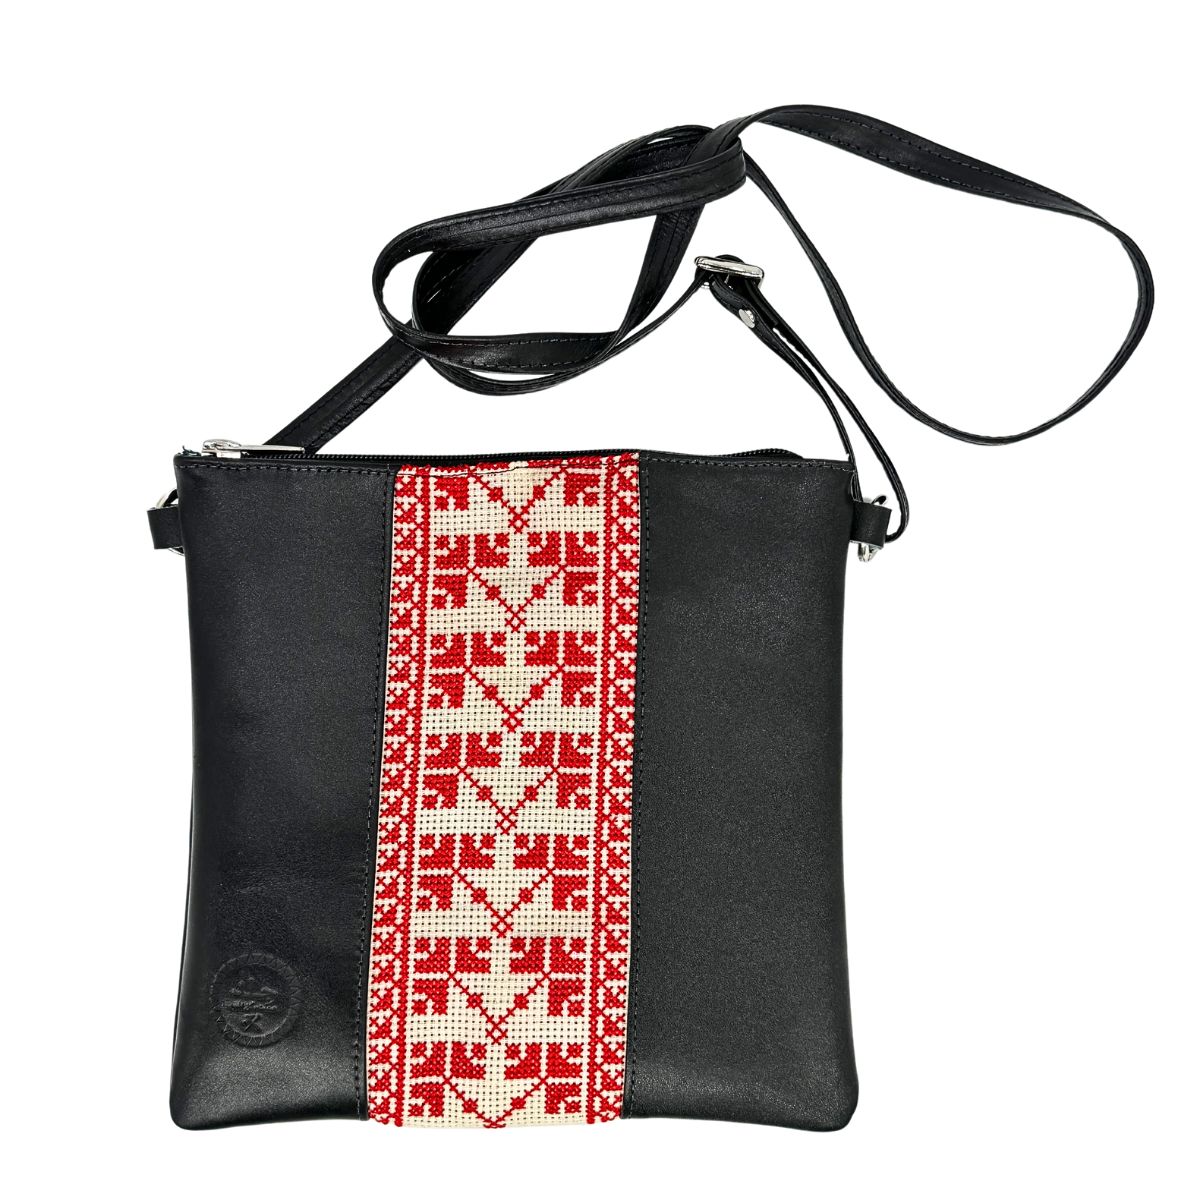 Leather Cross Body Bag with Embroidery